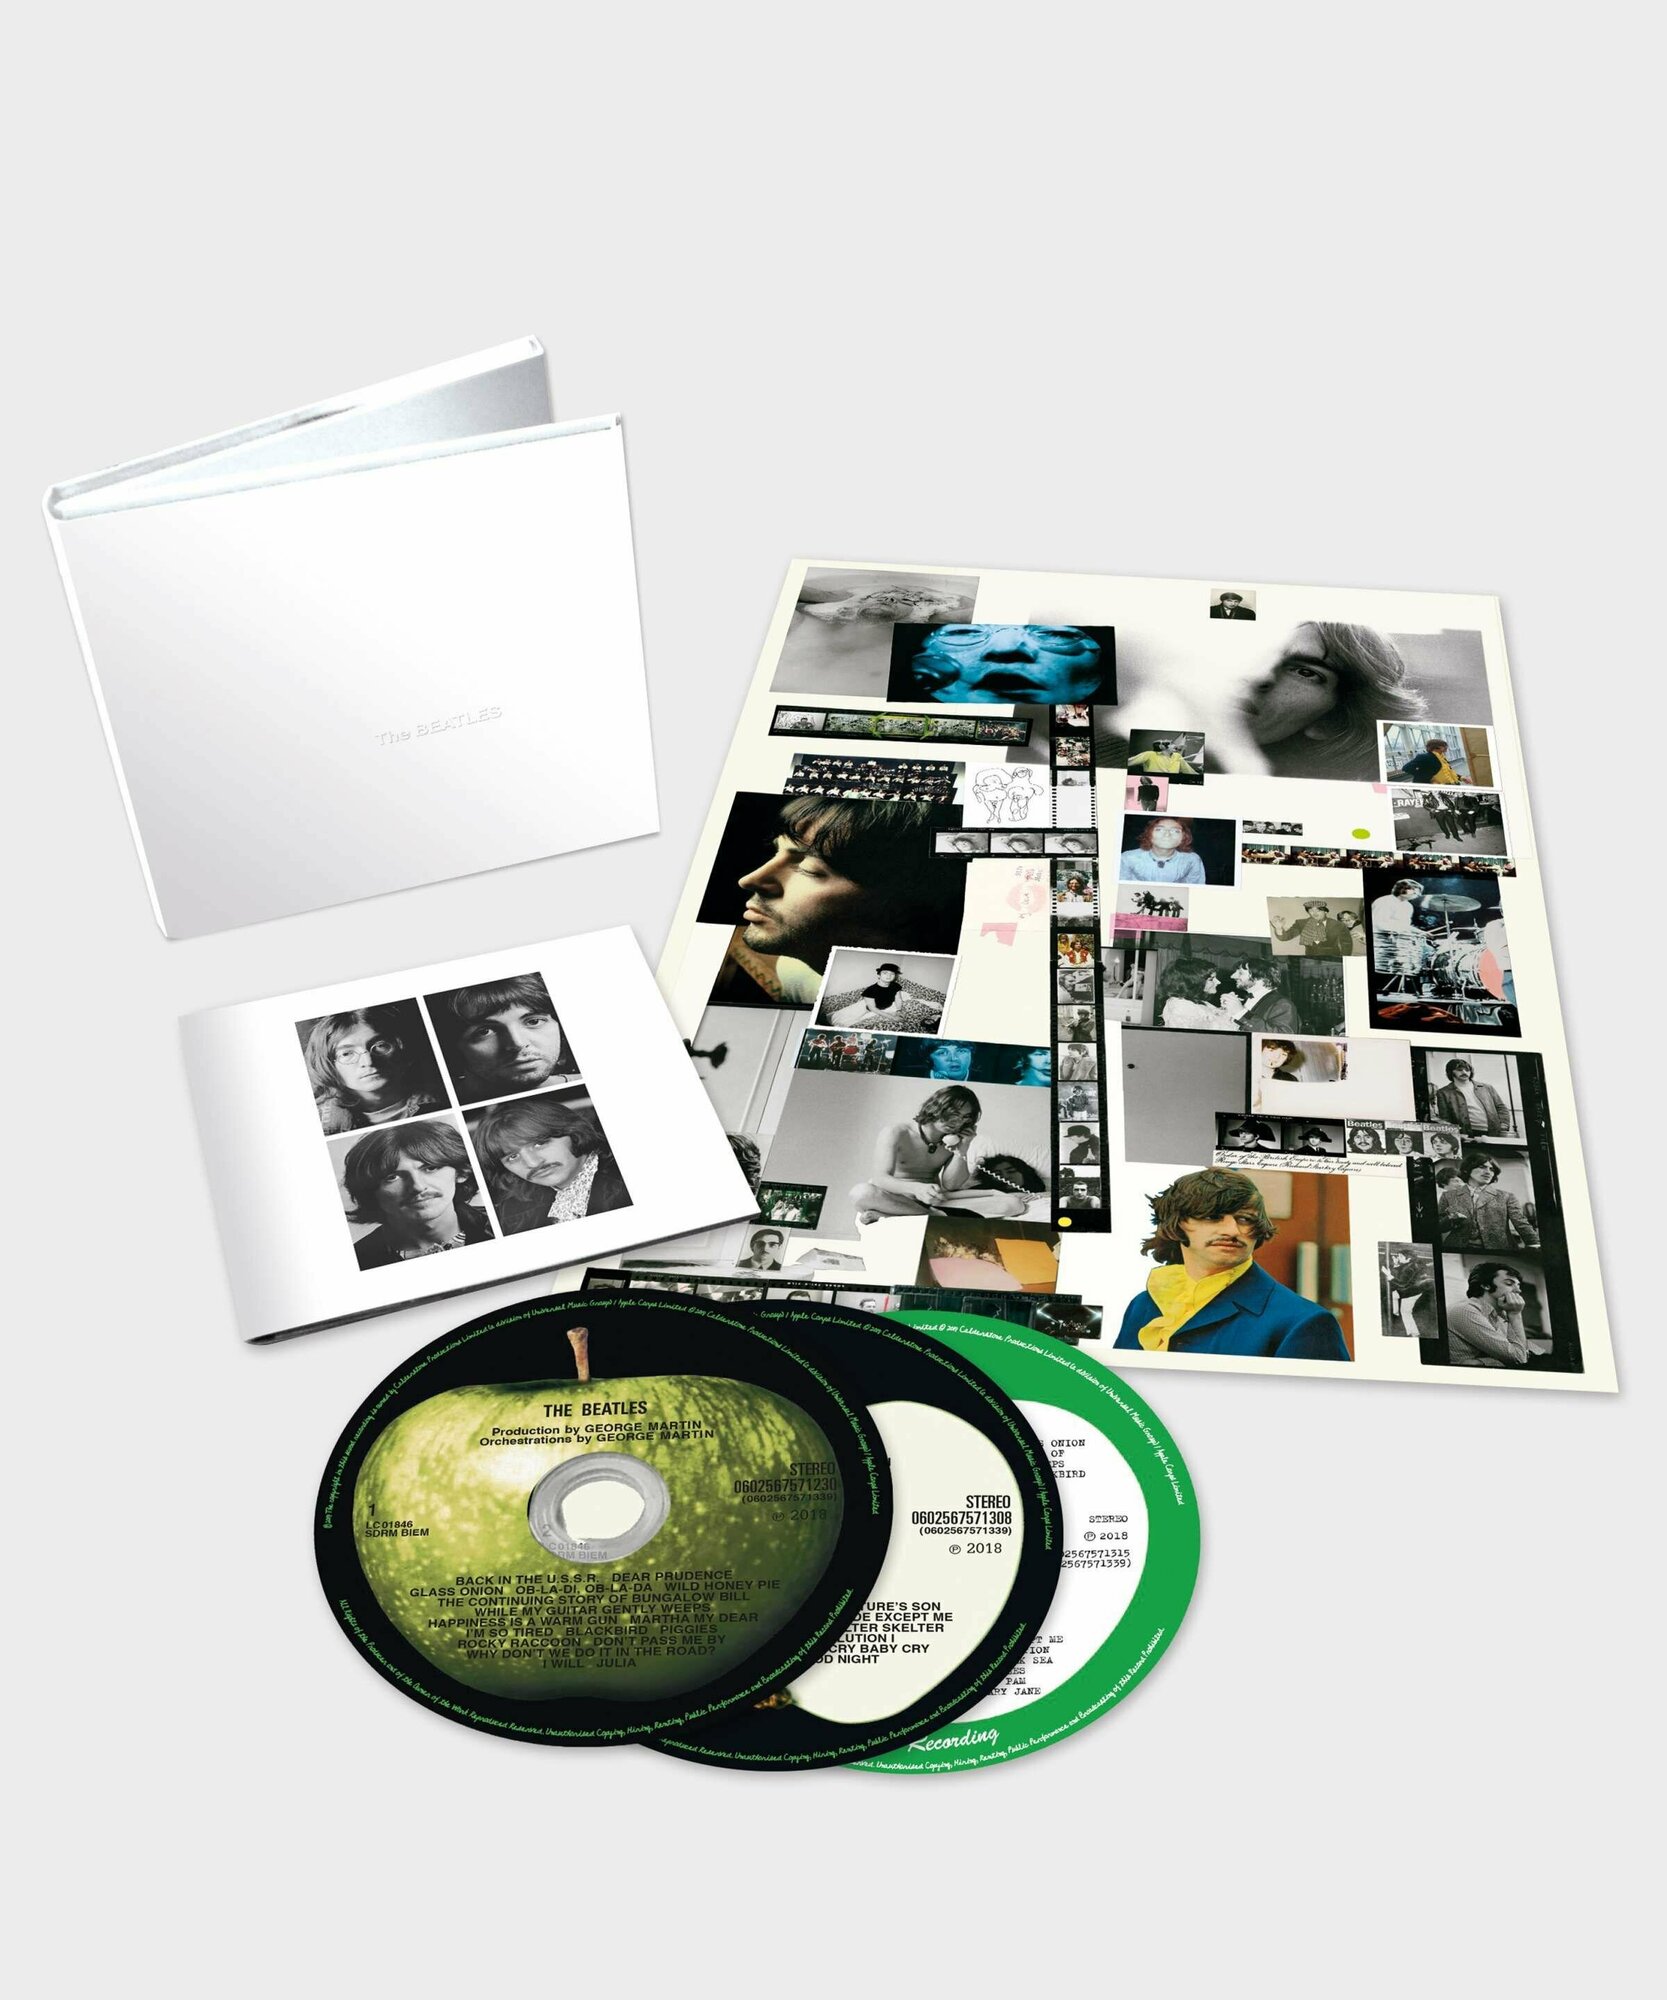 Audio CD The Beatles - The Beatles (White Album) (Limited Deluxe Edition) (3 CD)